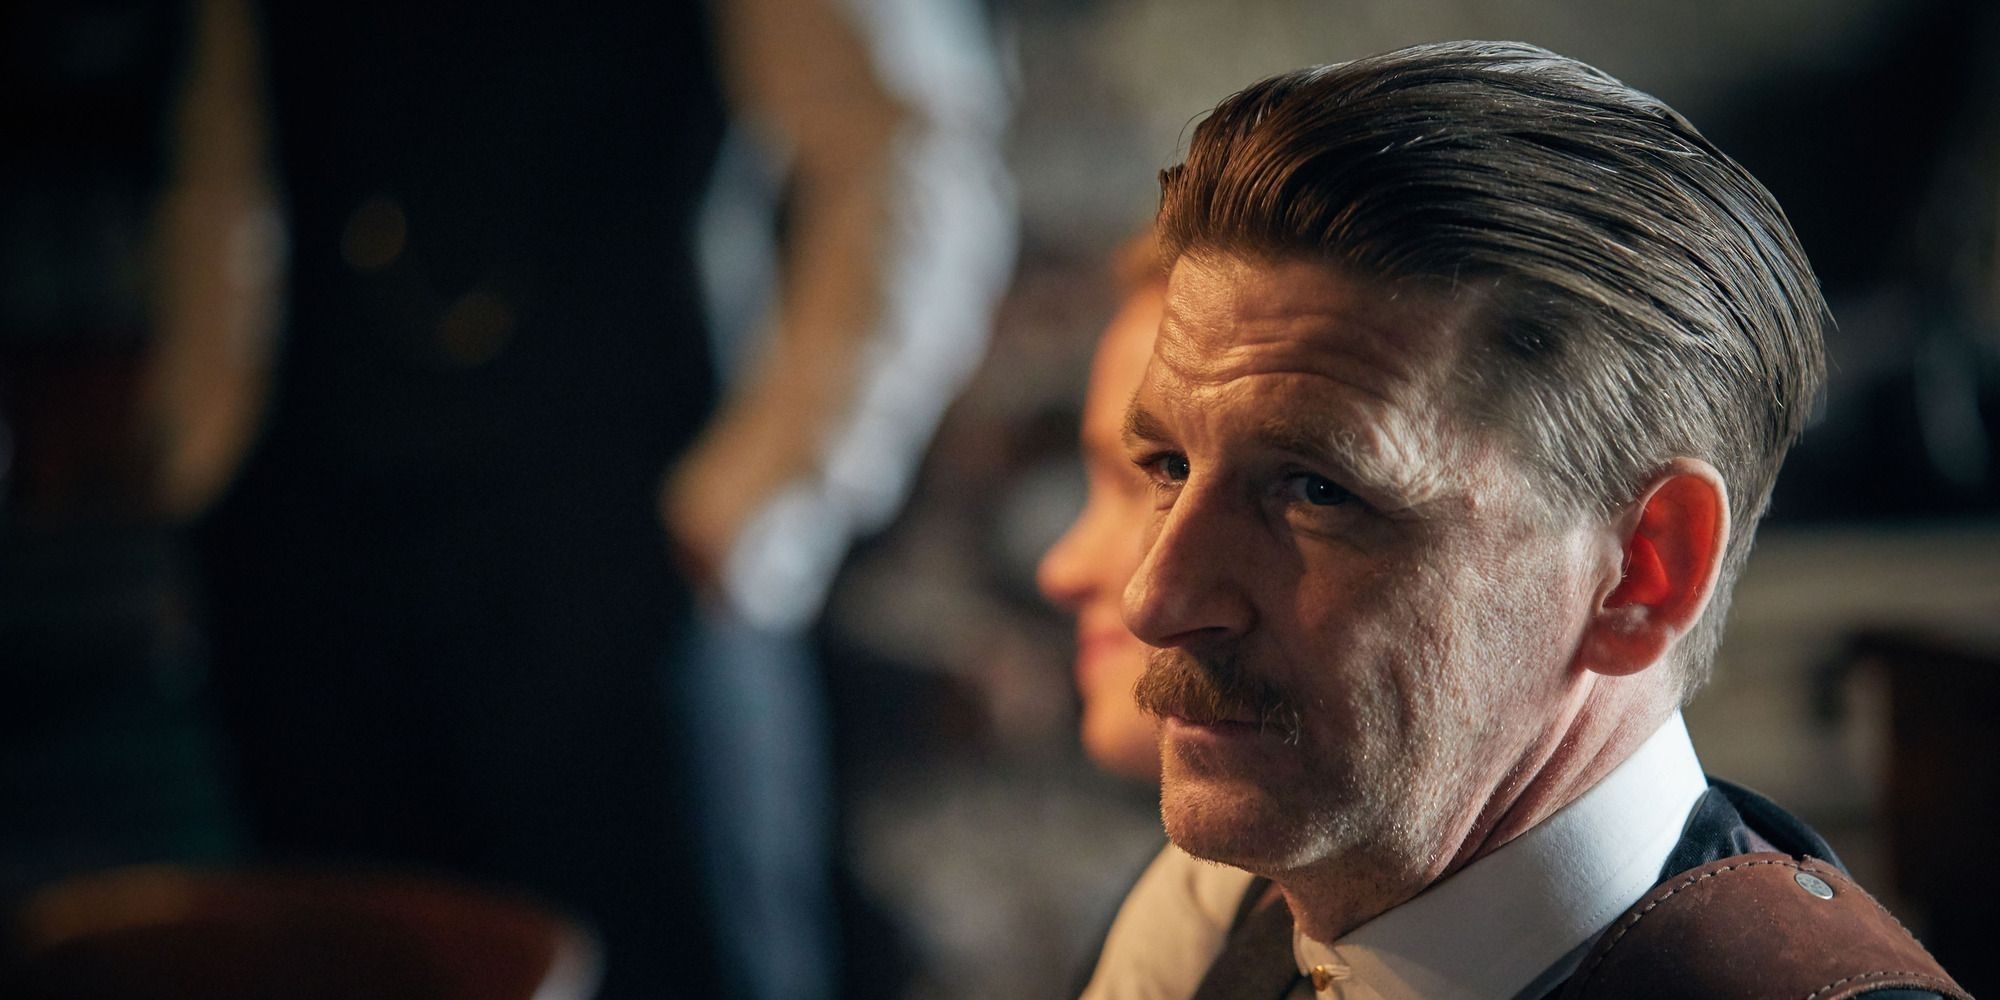 An image of Arthur from TV show Peaky Blinders.